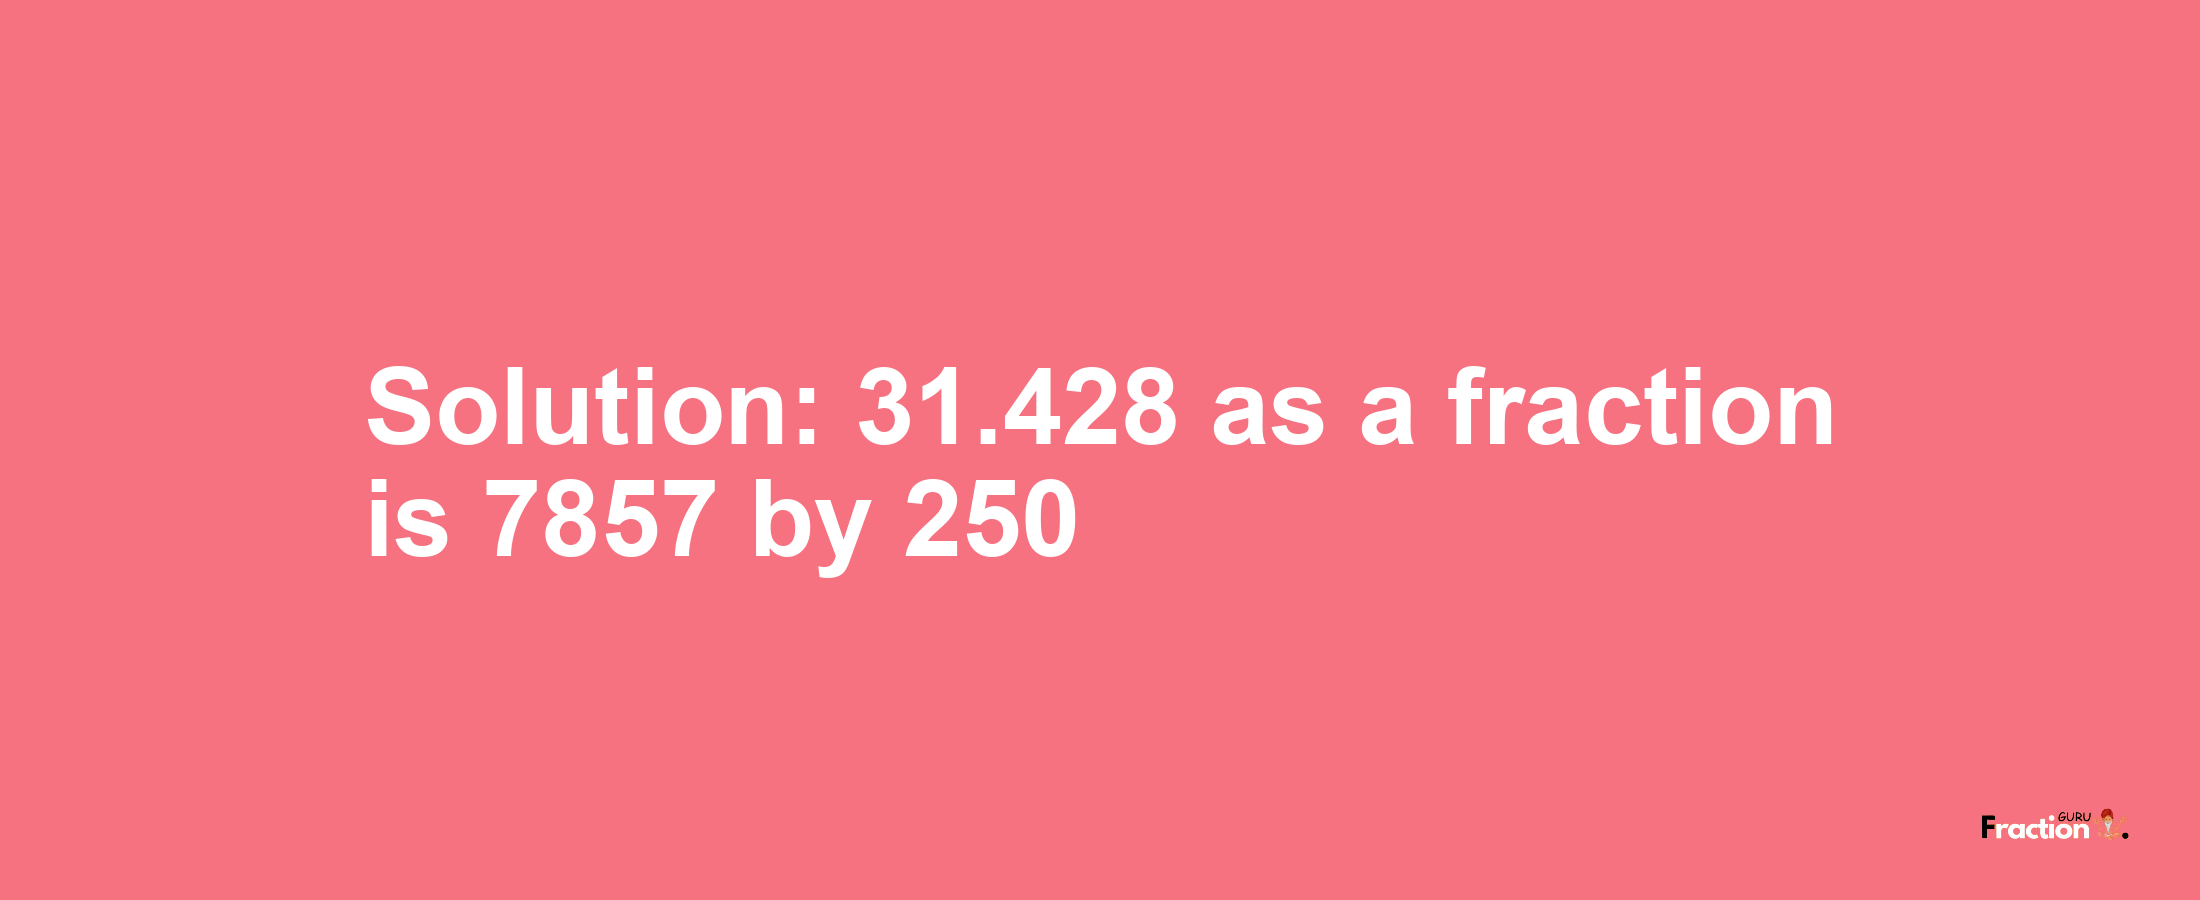 Solution:31.428 as a fraction is 7857/250